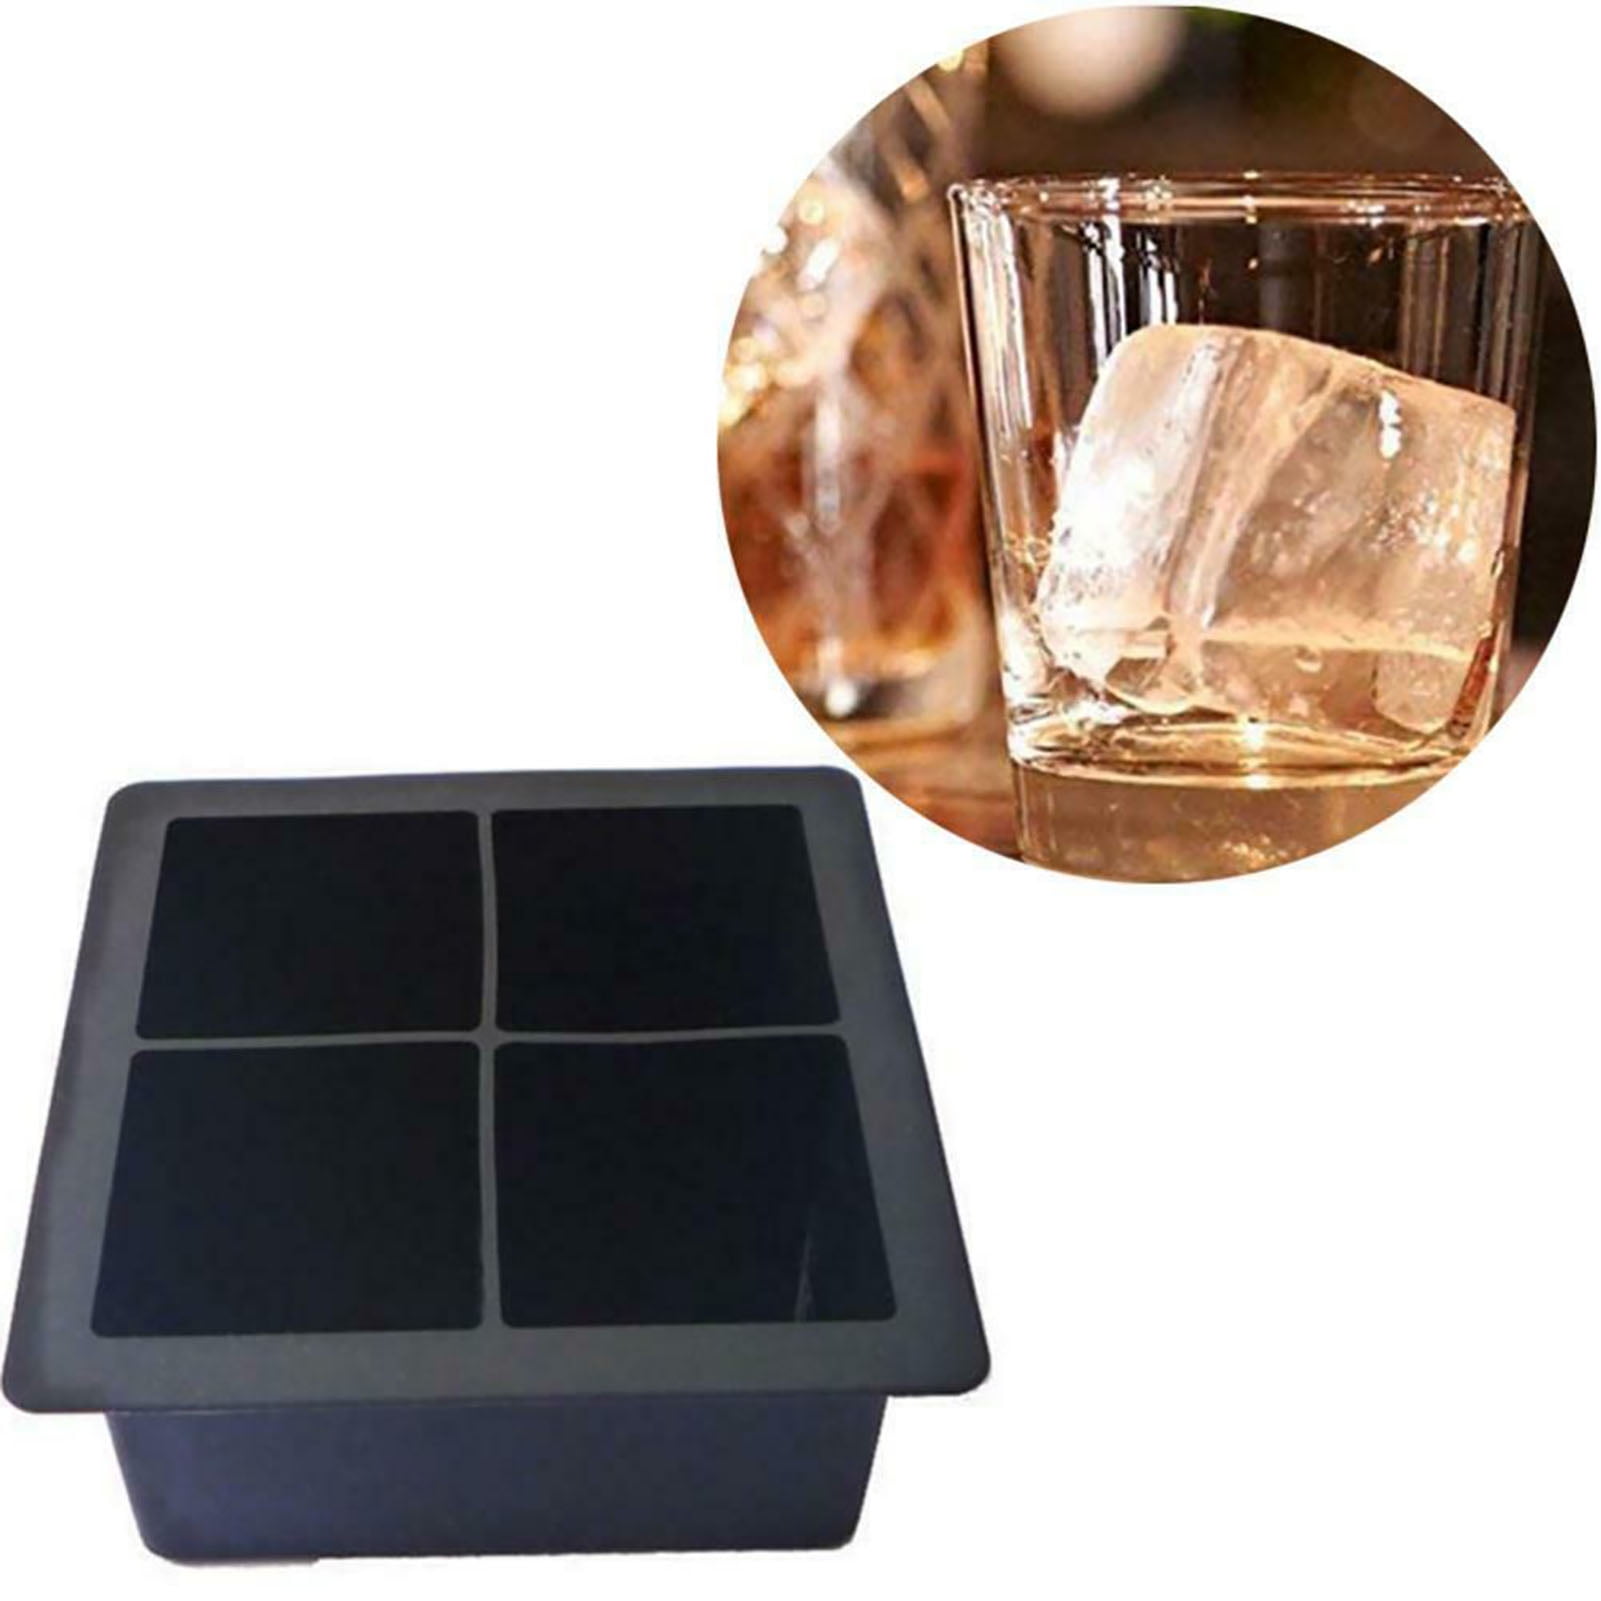 Cocktail Cube Silicone Extra Large Ice Cube Trays - 2.5 inches - Whiskey  Drinks - Frozen Food Portions - Soap Making Molds (Blue 1 Tray)